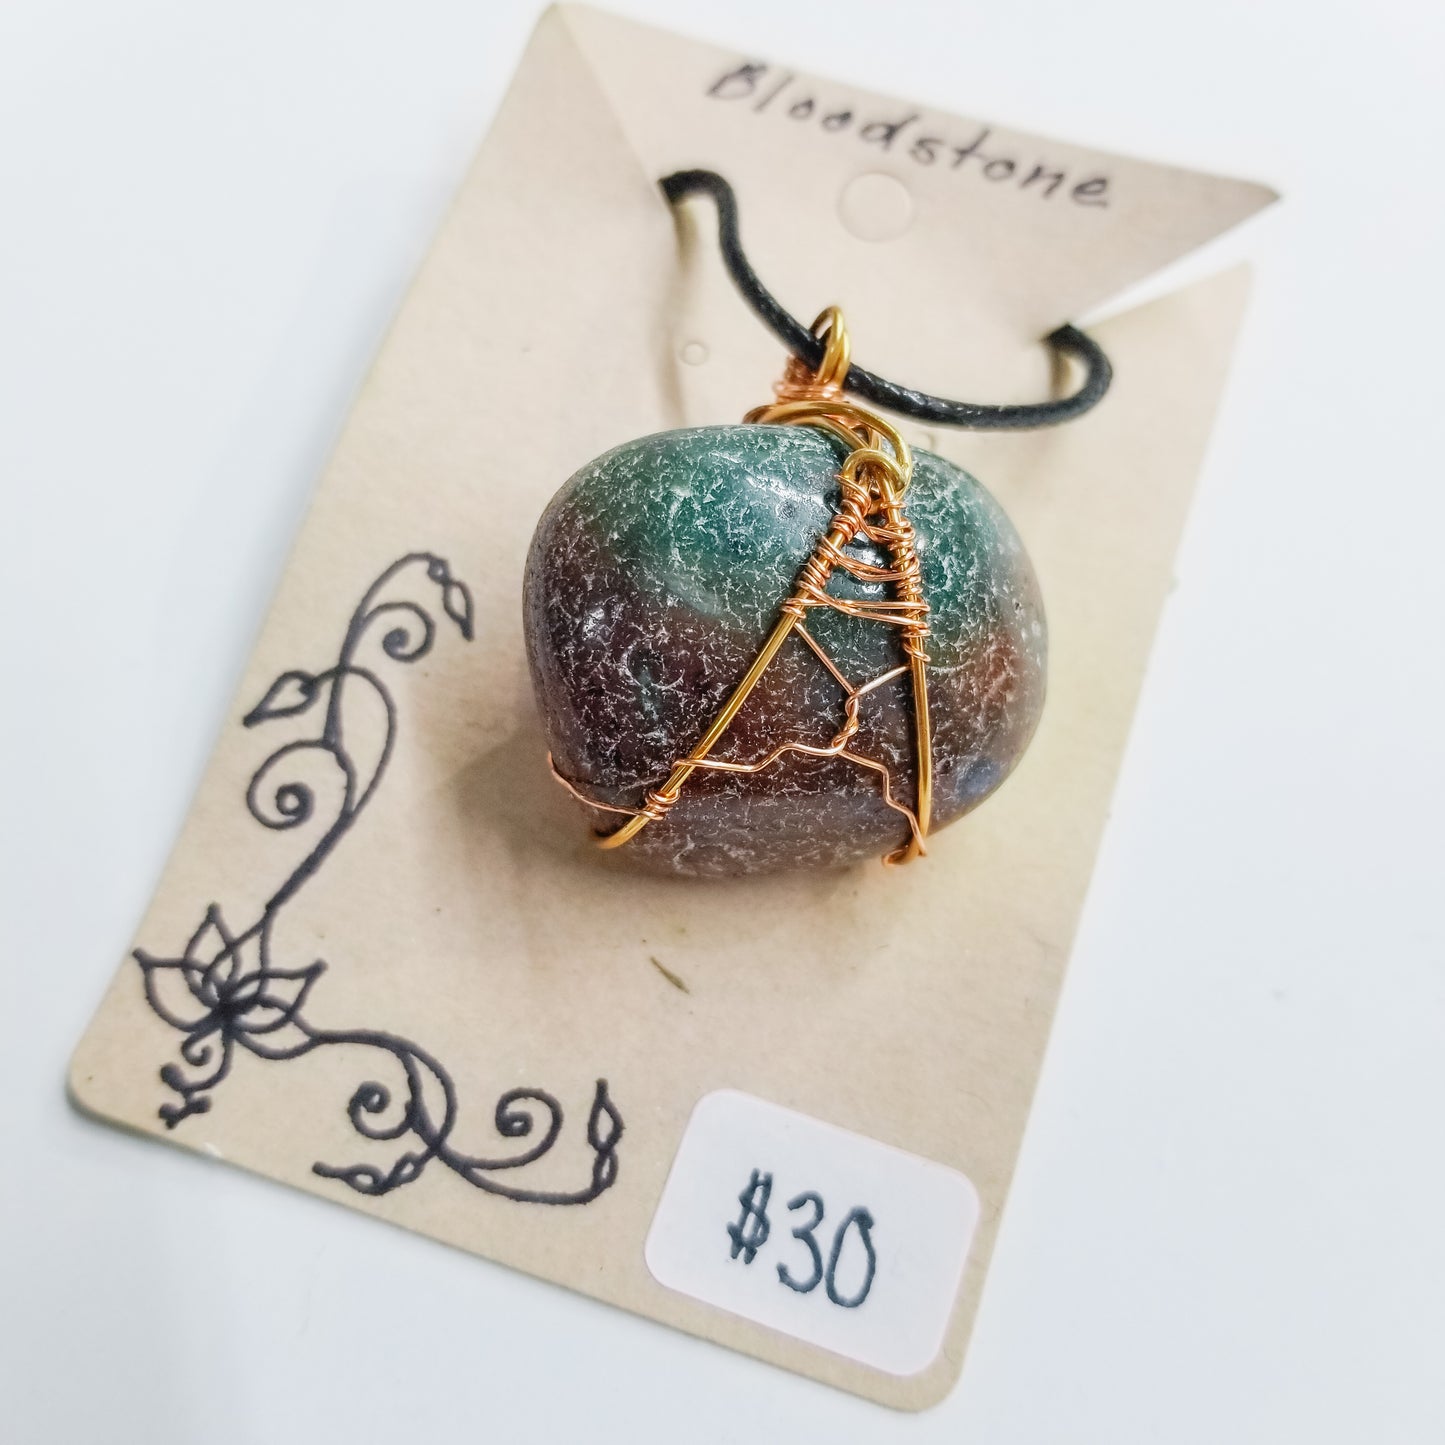 Bloodstone Handwrapped Necklace